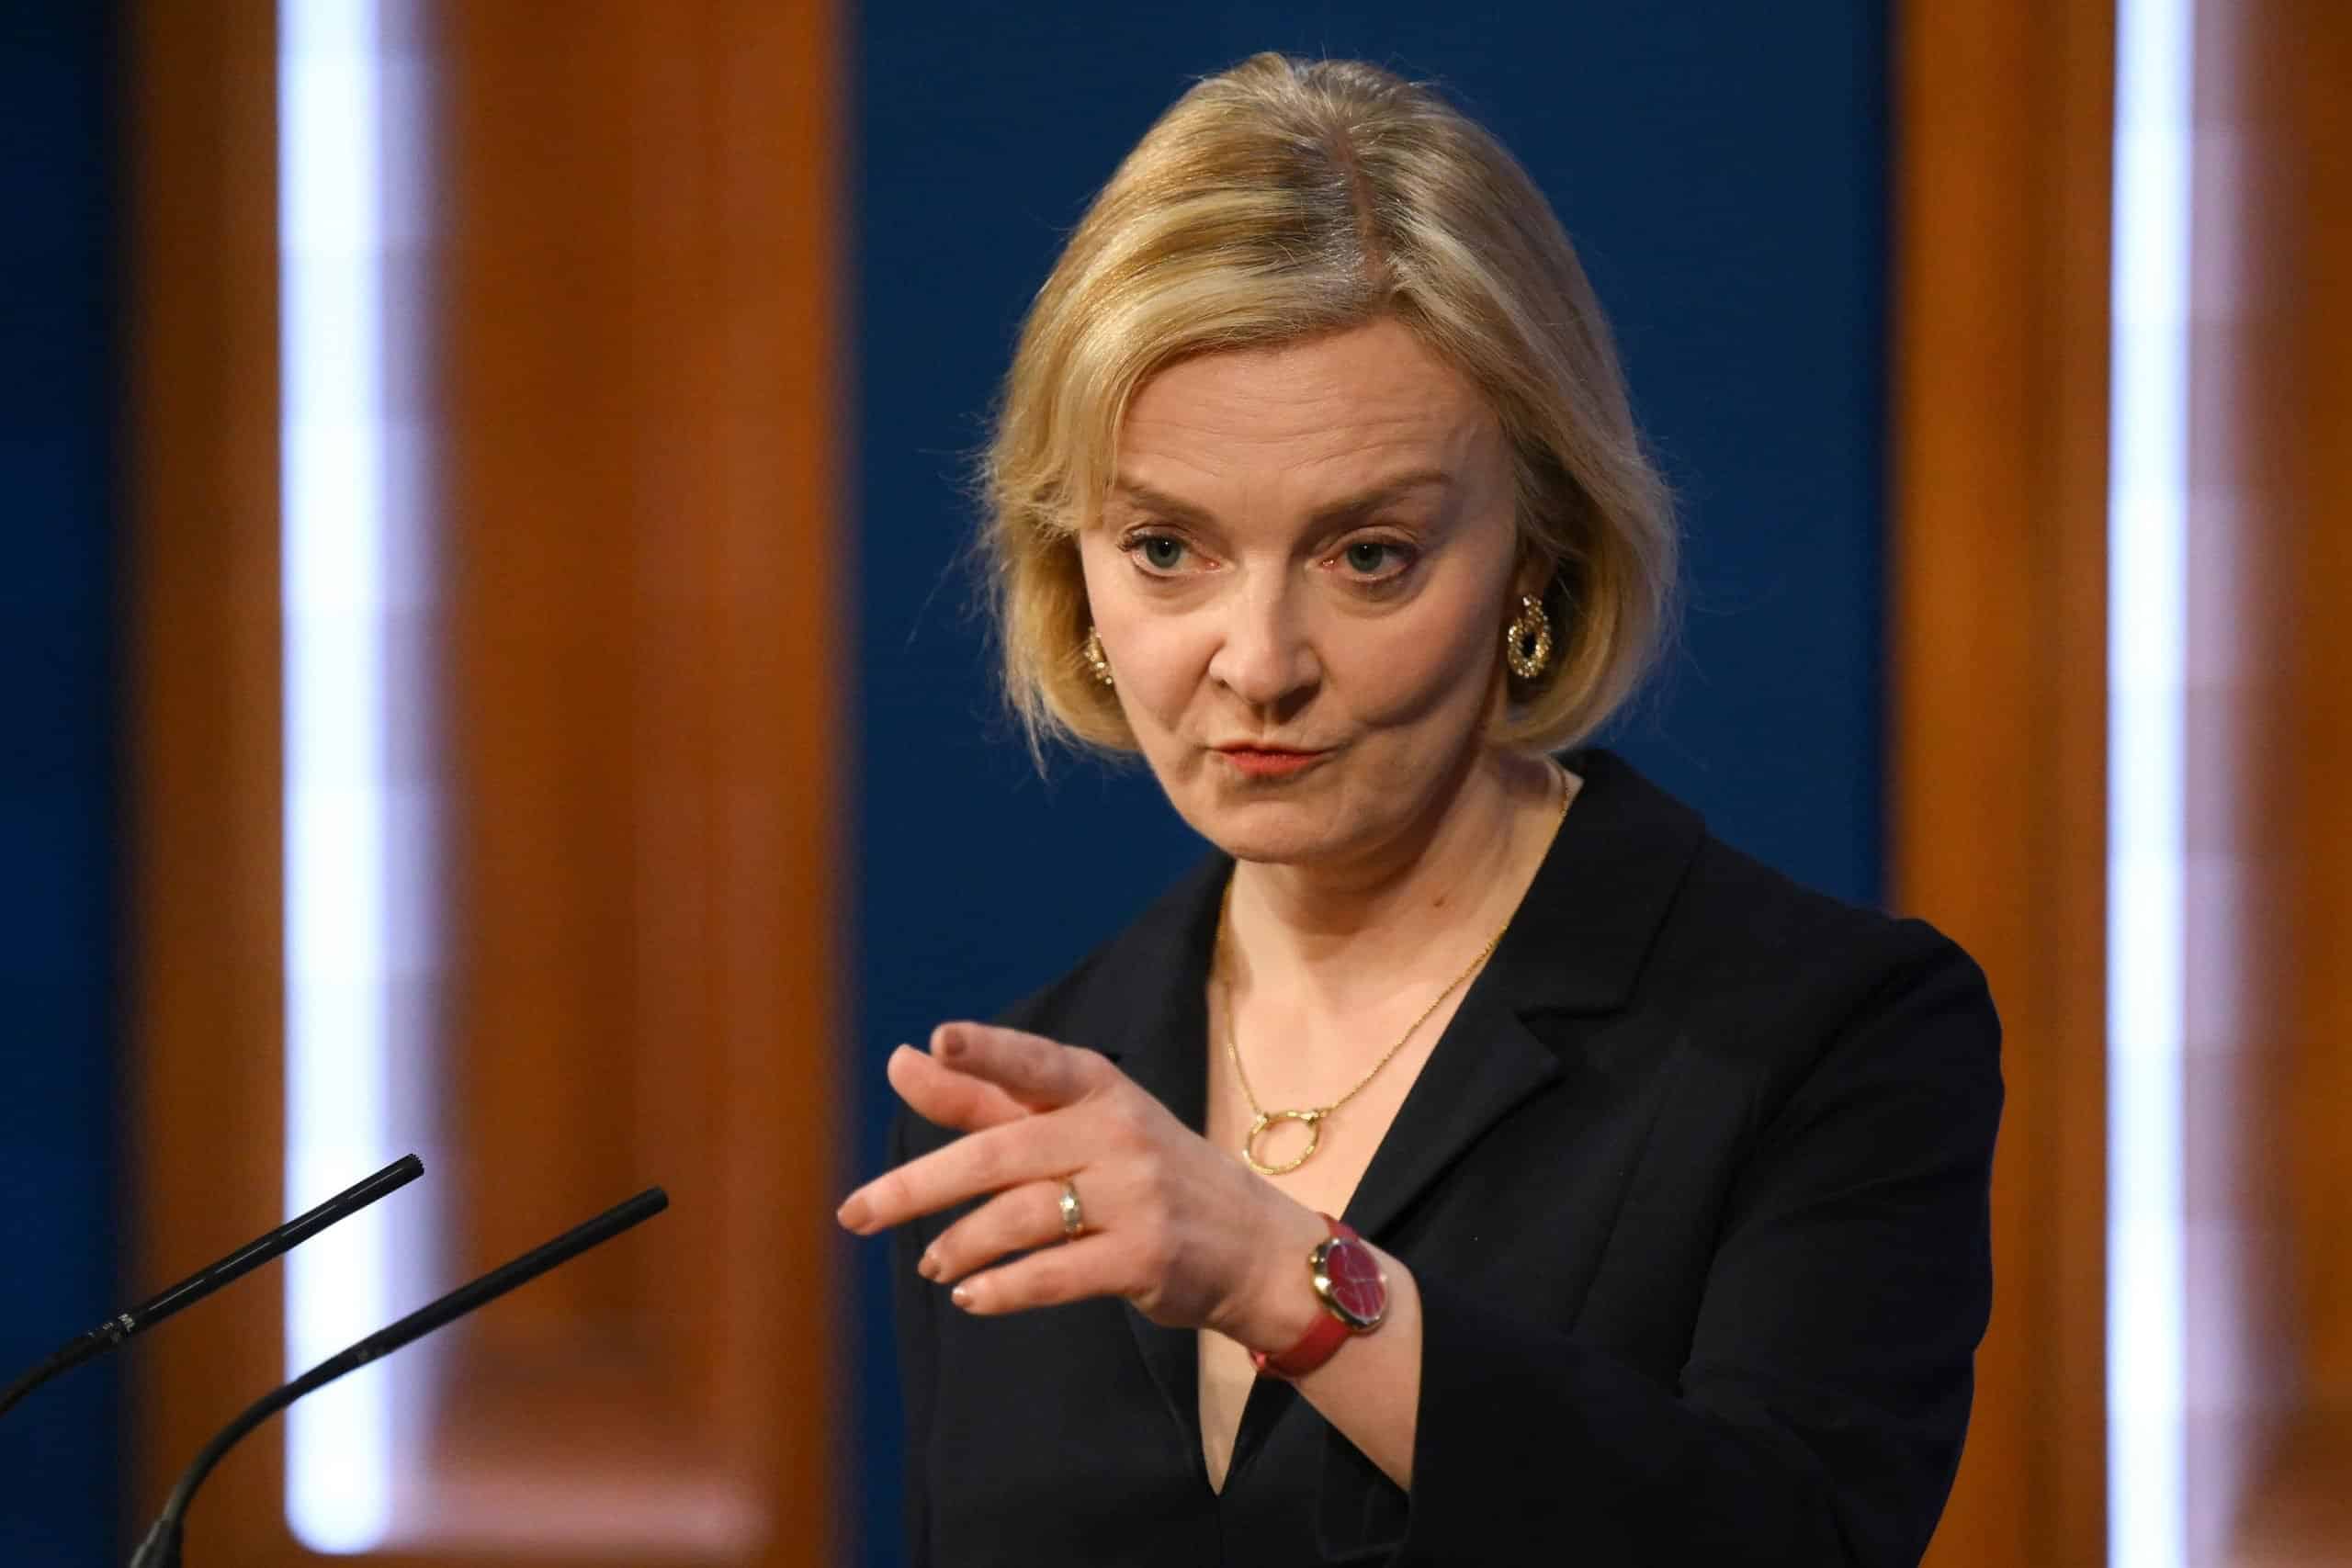 Liz Truss tops list of prime ministers who left Britain worse off